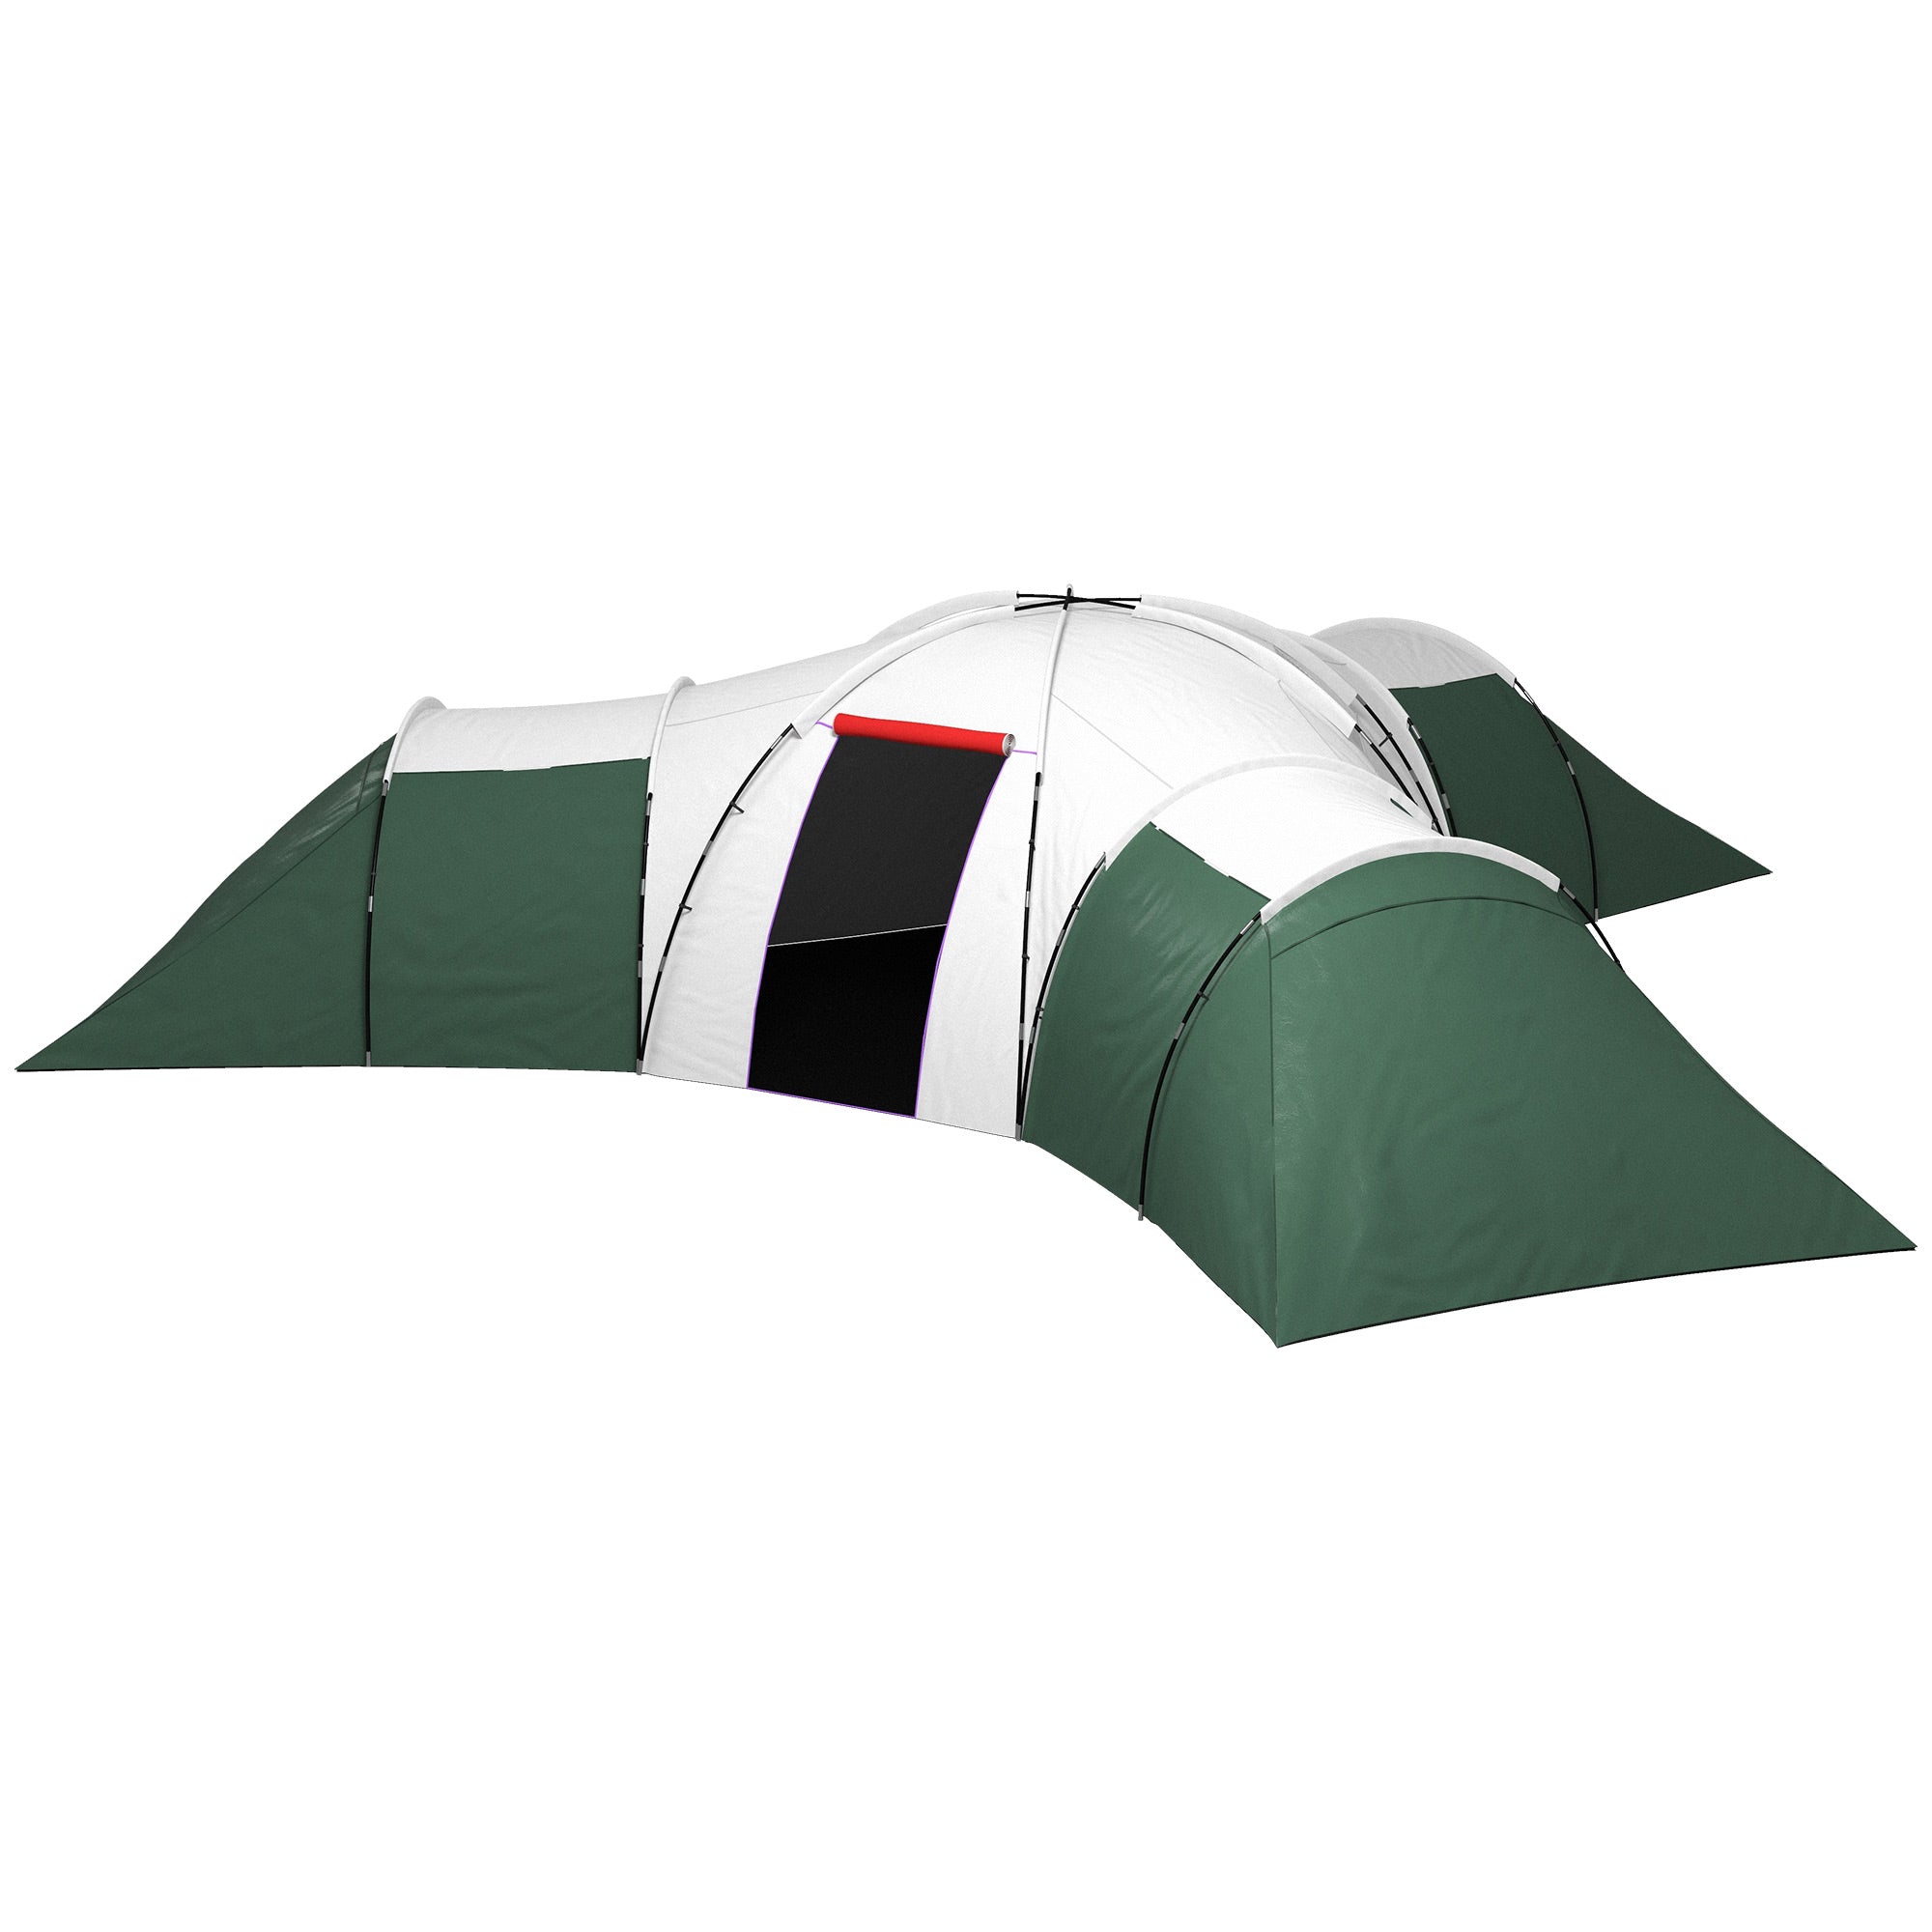 6-9 Man Tent with Bedrooms and Living Room, Accessories Included-0